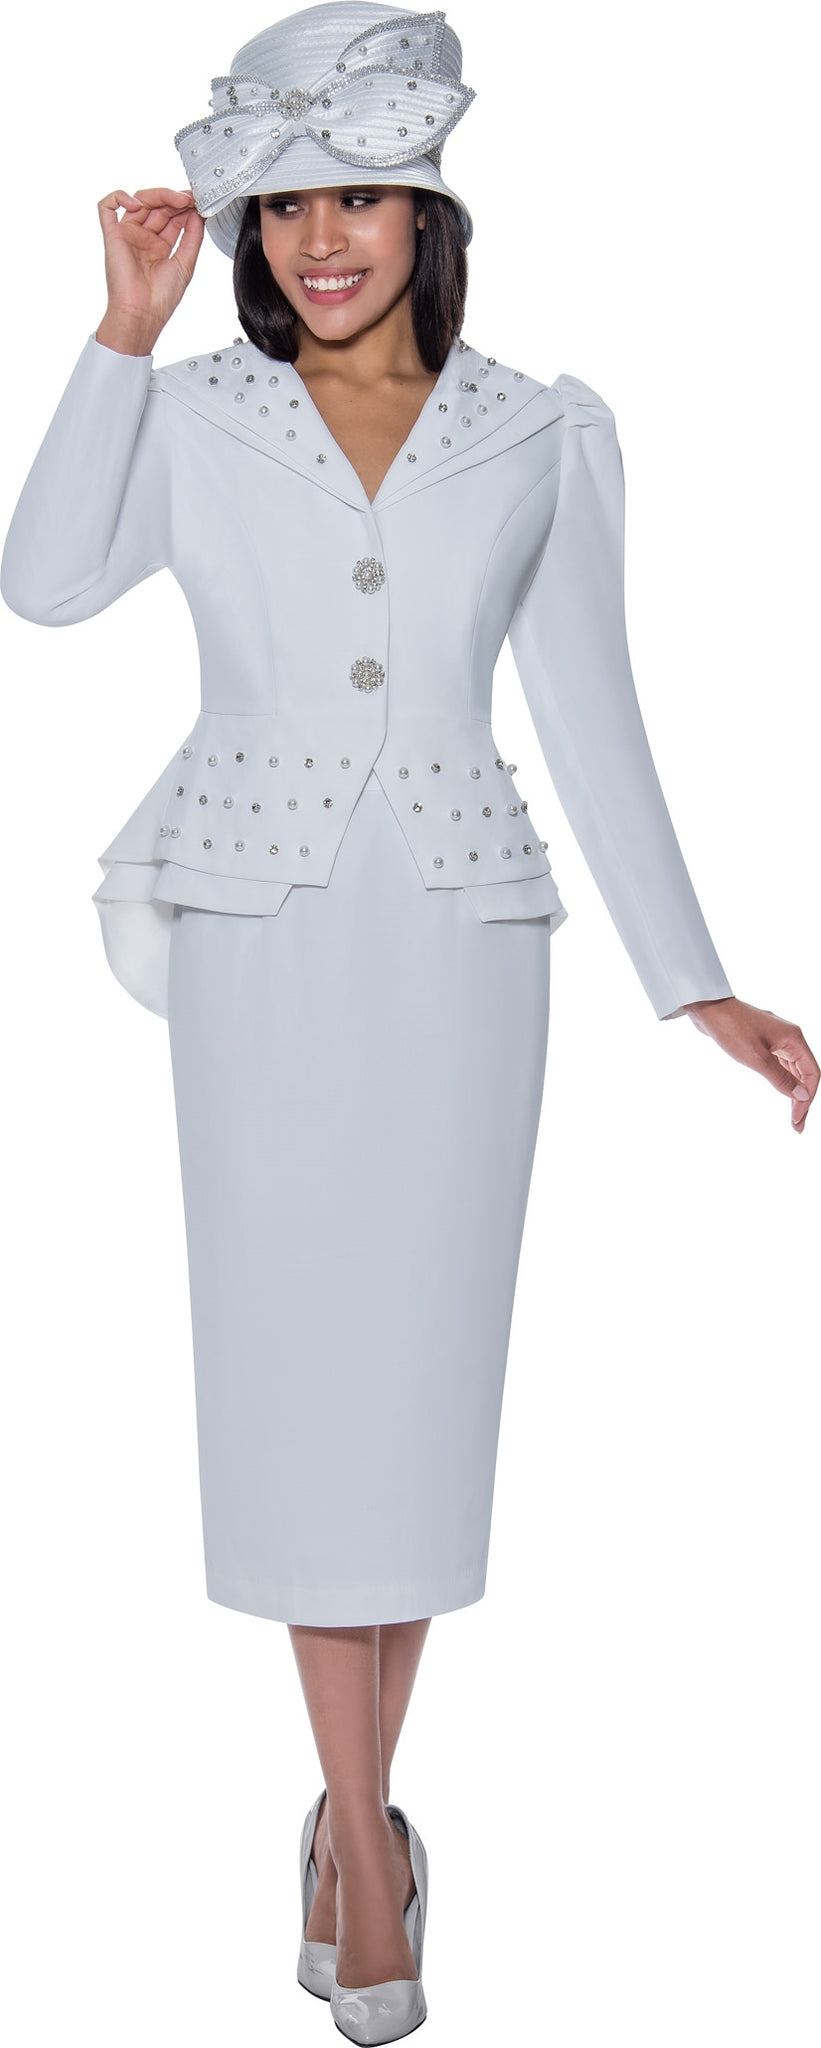 GMI Church Suit 9522-White - Church Suits For Less